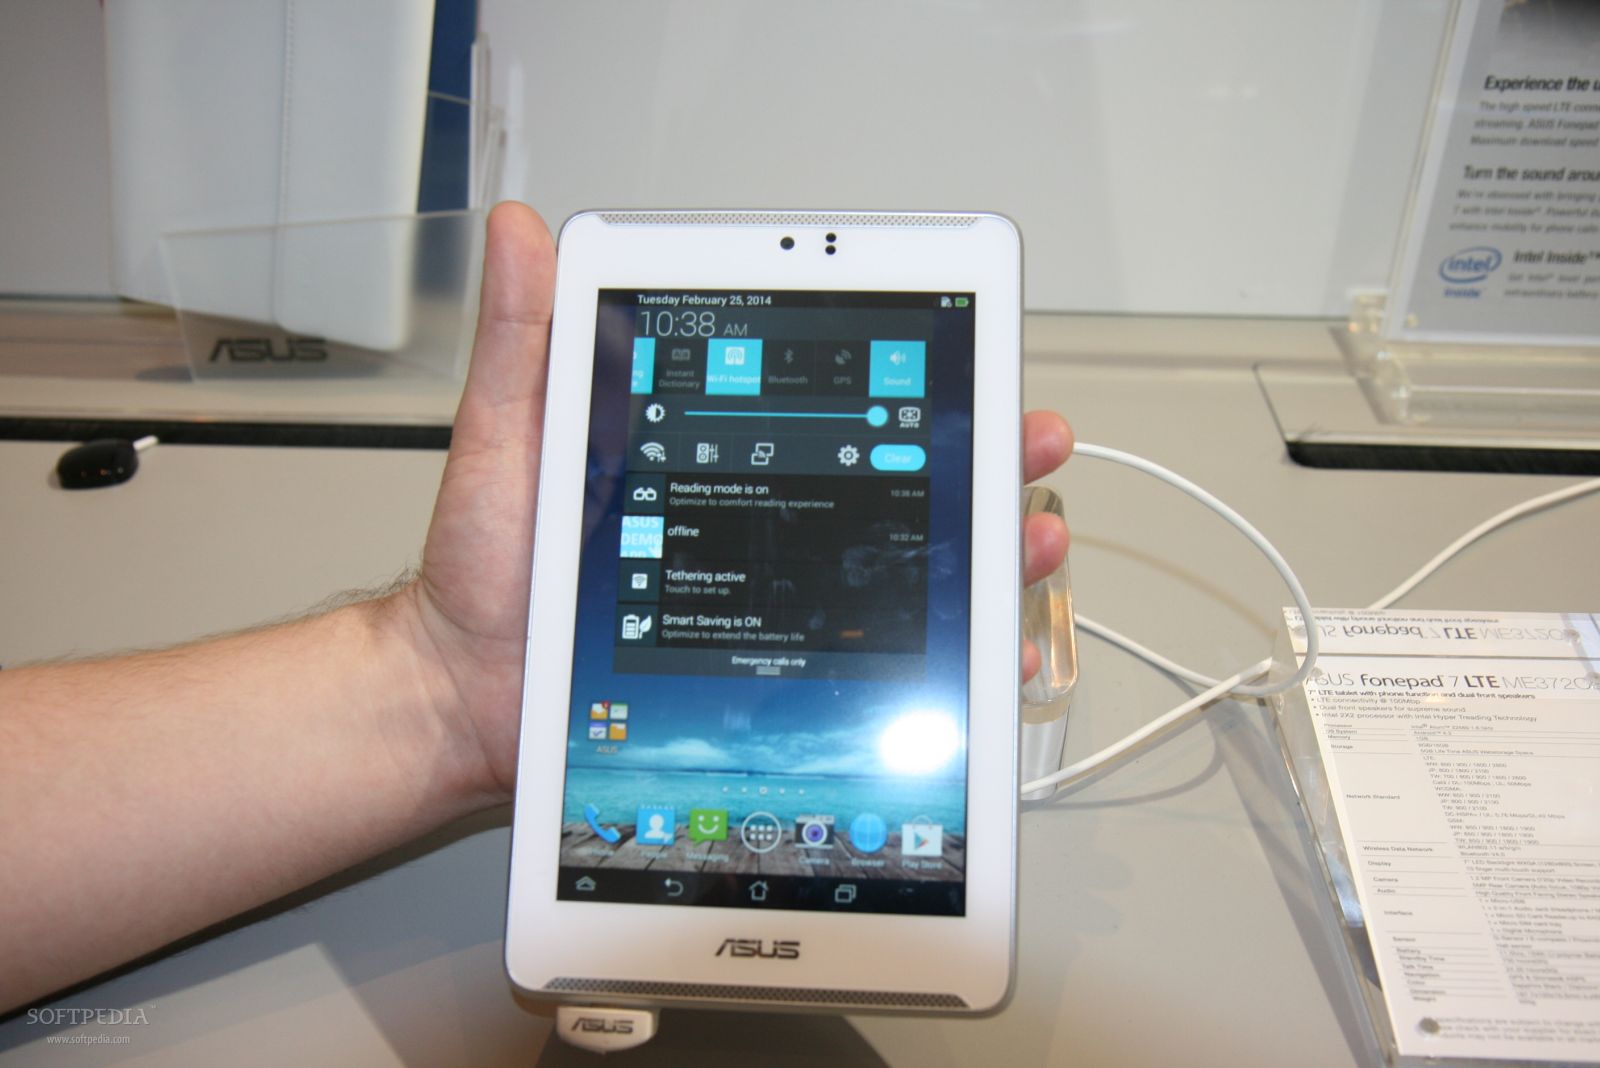 Hands-On: ASUS Fonepad 7 with LTE, Android 4.3